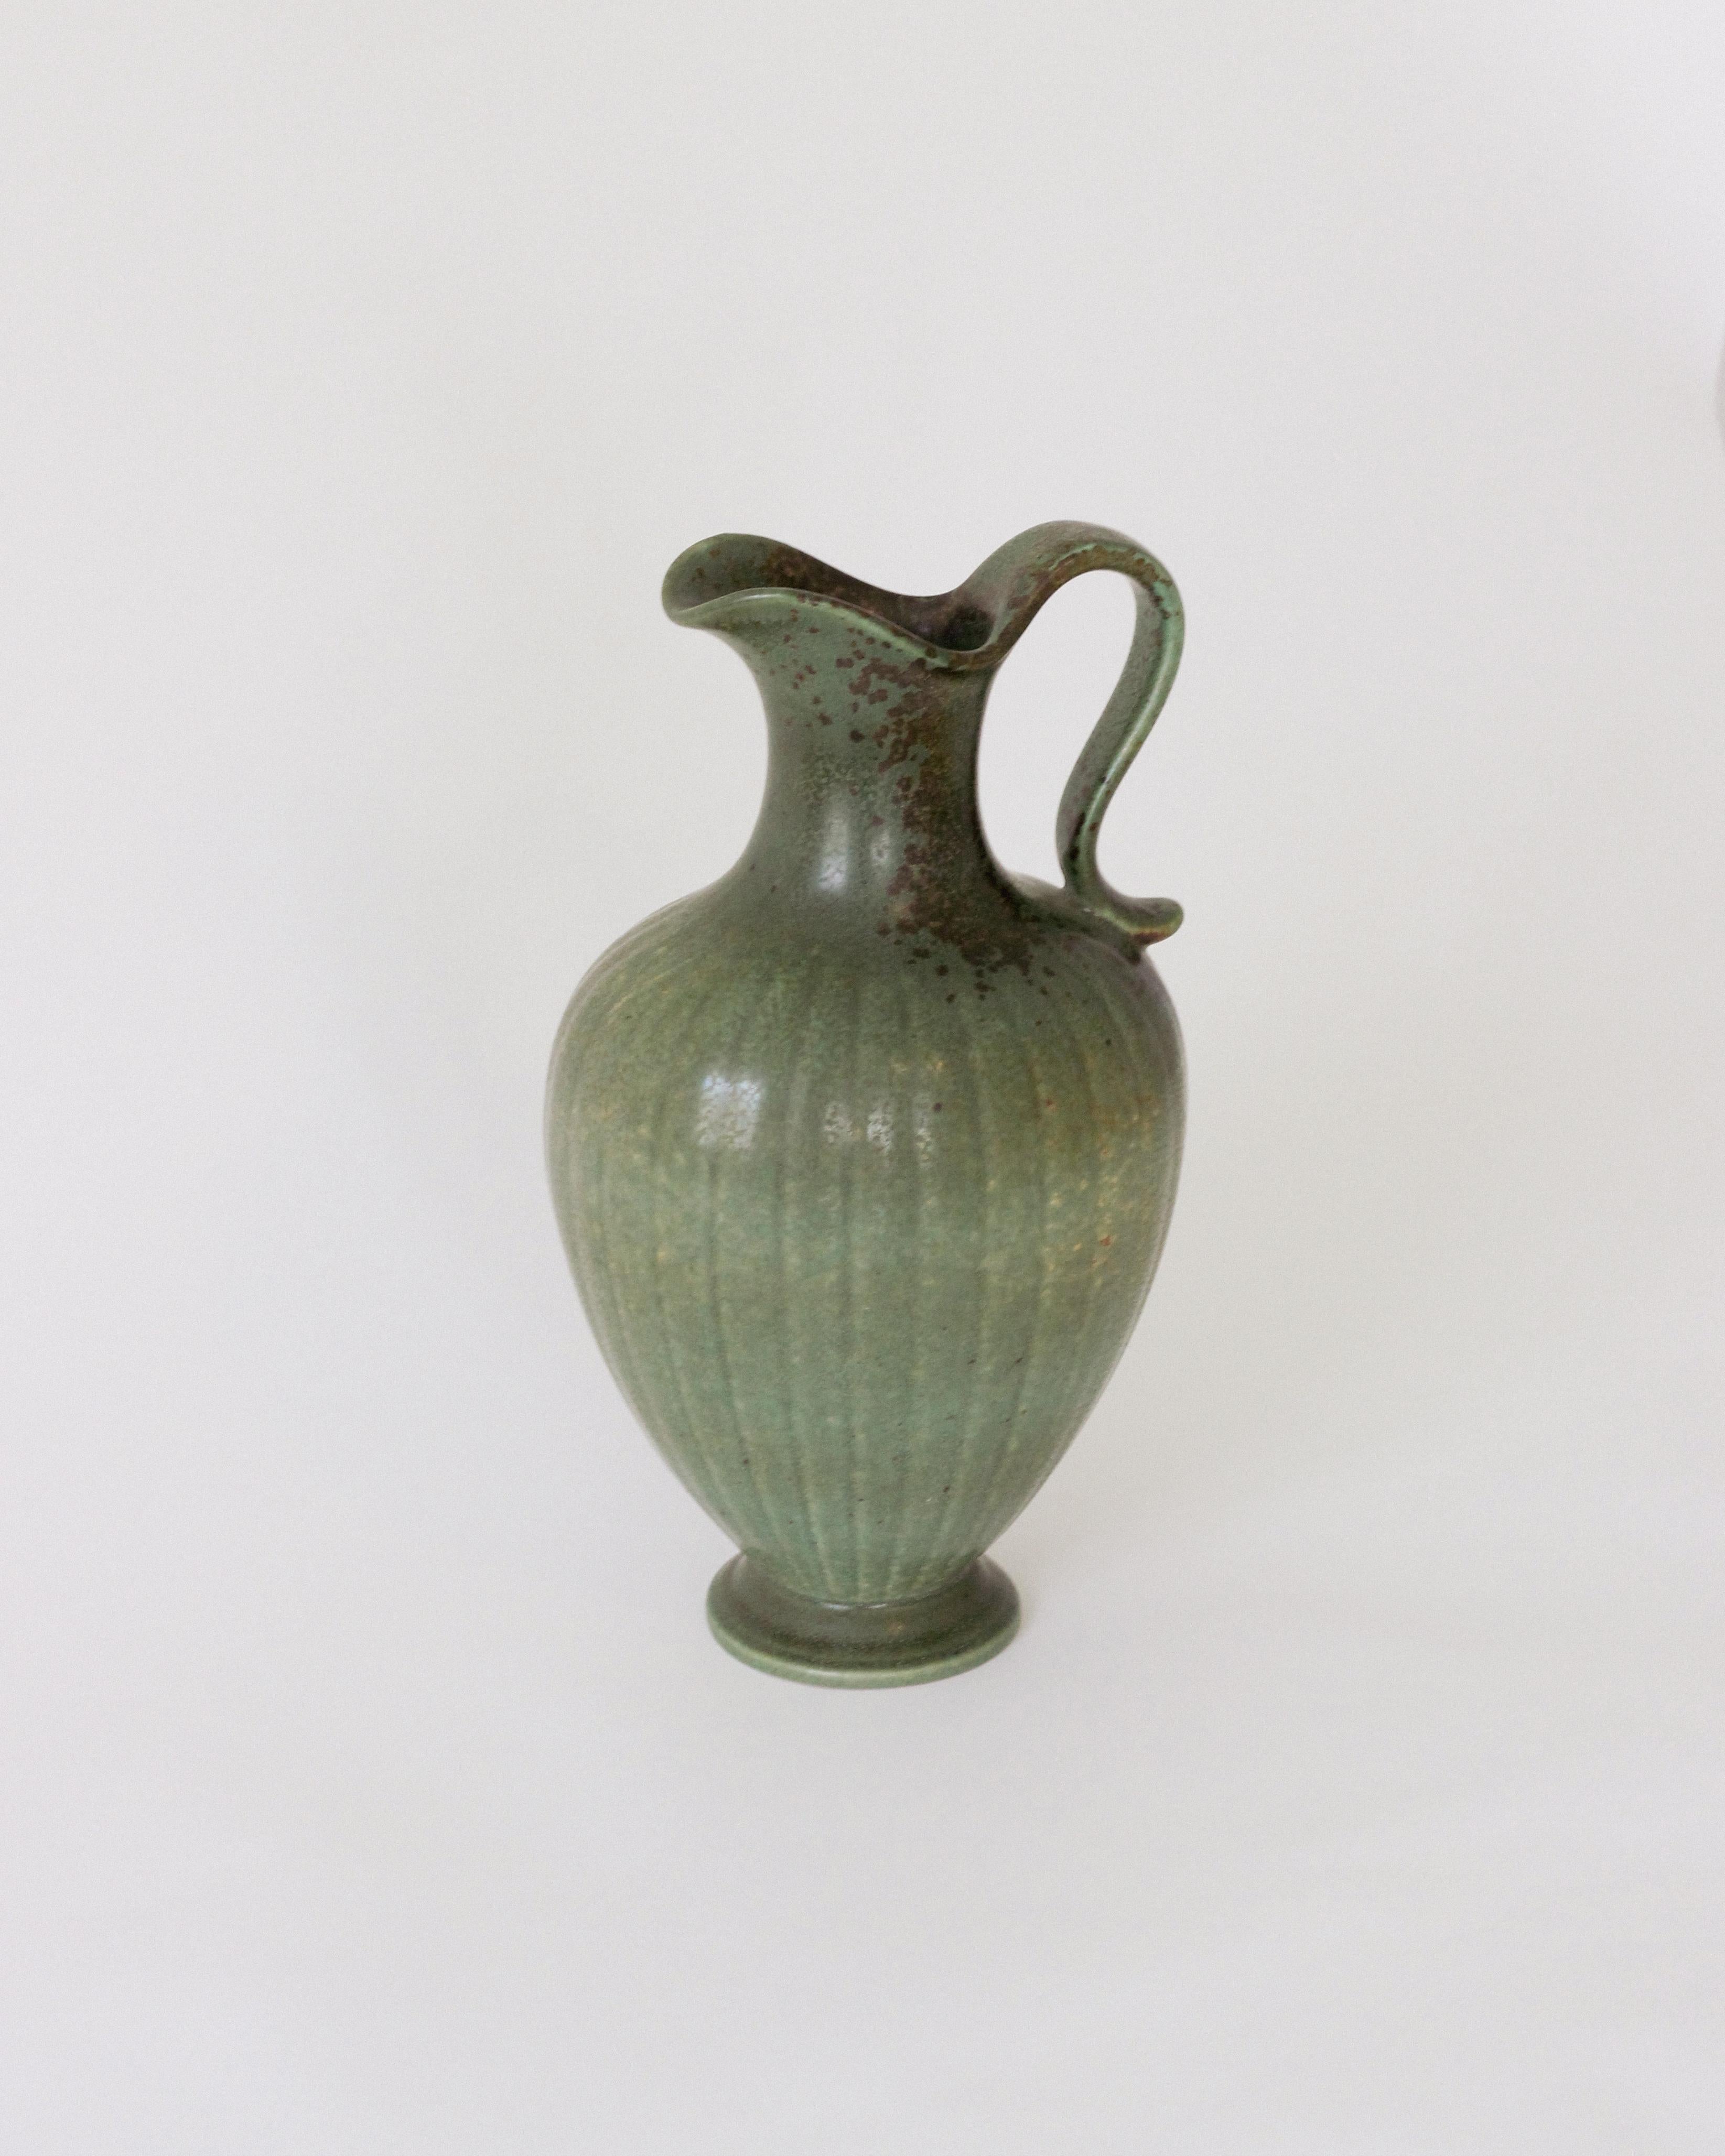 Impeccable and rare stoneware pitcher produced by Rörstrands, Sweden, 1940s. Designed and signed by Gunnar Nylund, (Swedish, 1914-1997).

Nylund served as artistic director at Rörstrands, where he worked 1931-1955. Prior to his work at Rörstrand he